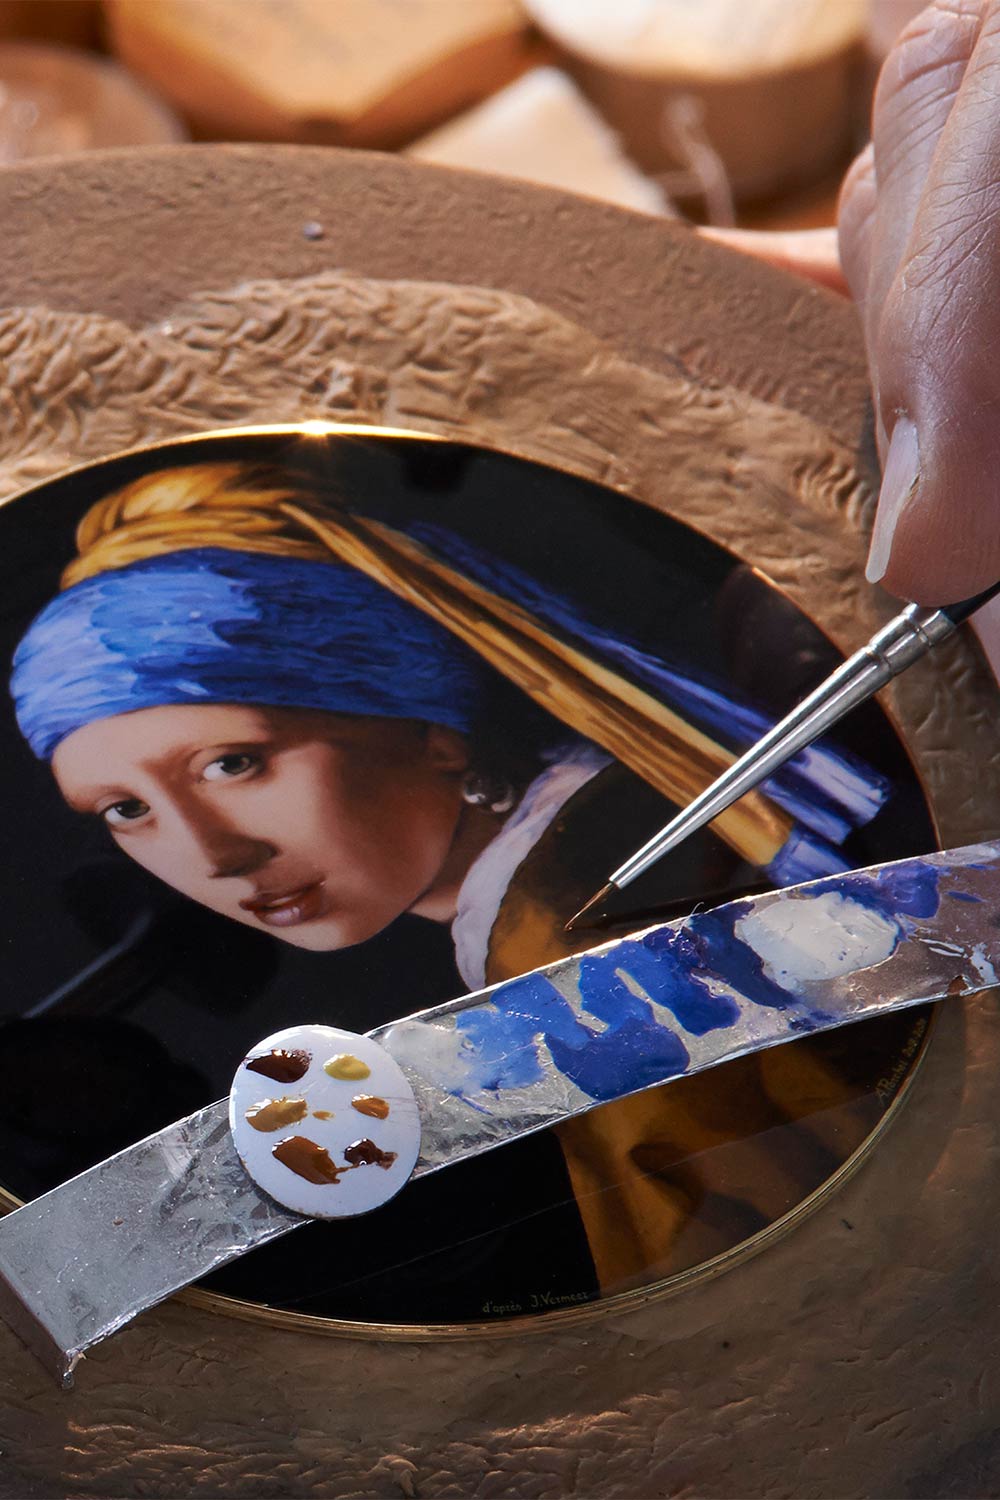 Every layer on the girl’s turban in the miniature painting requires at least two weeks of work by the artist.